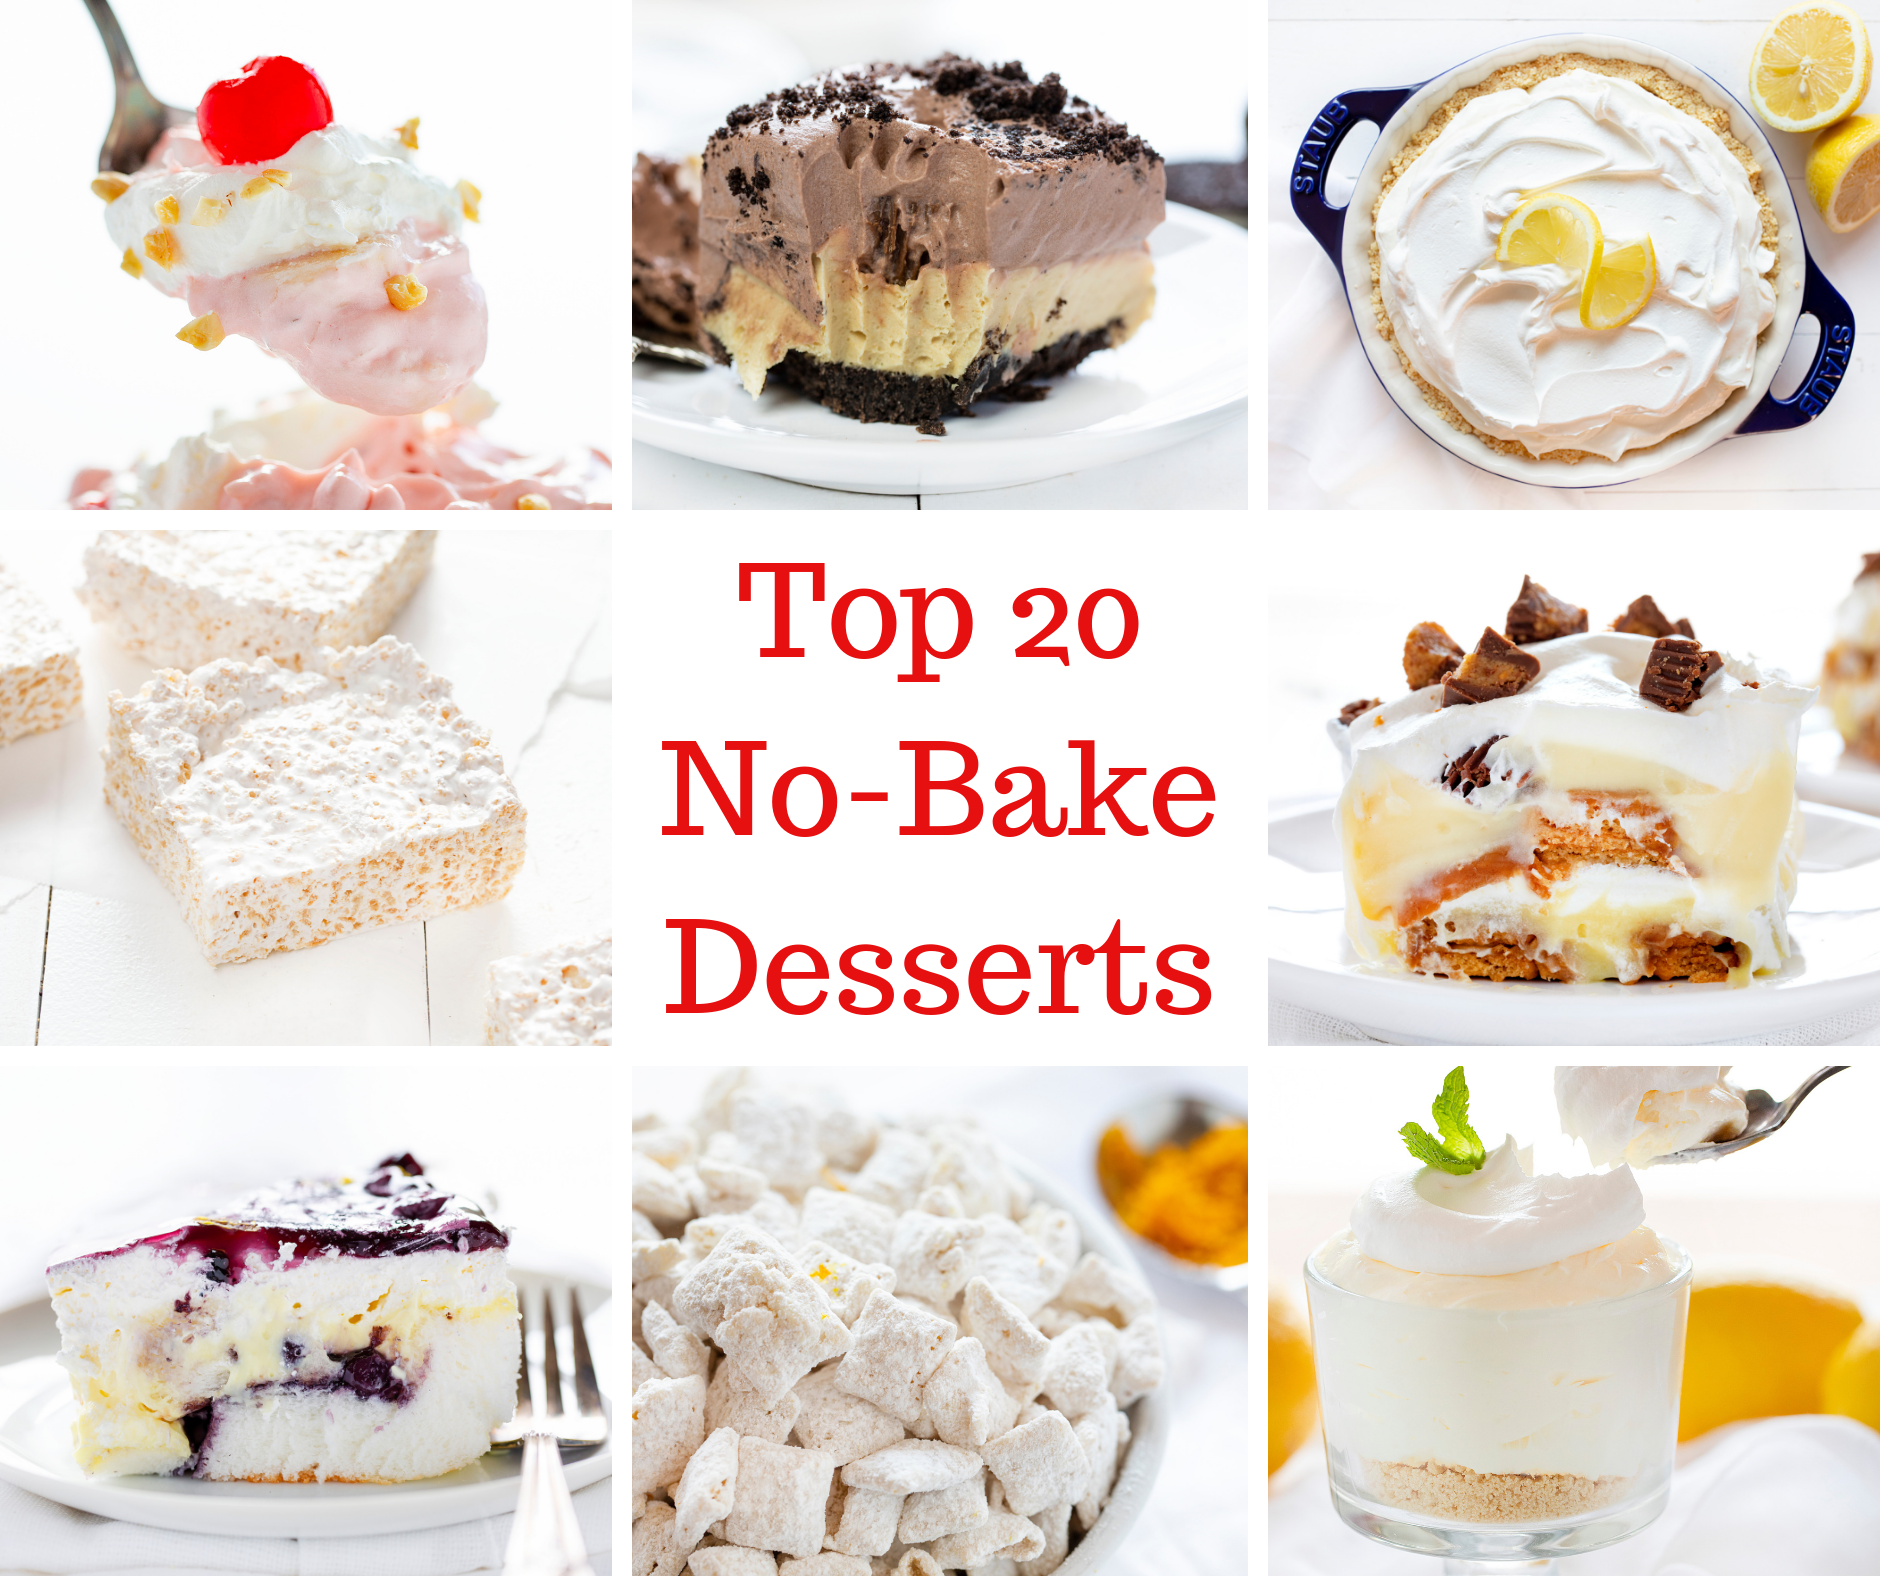 Top 20 No Bake Desserts Collage of Images.